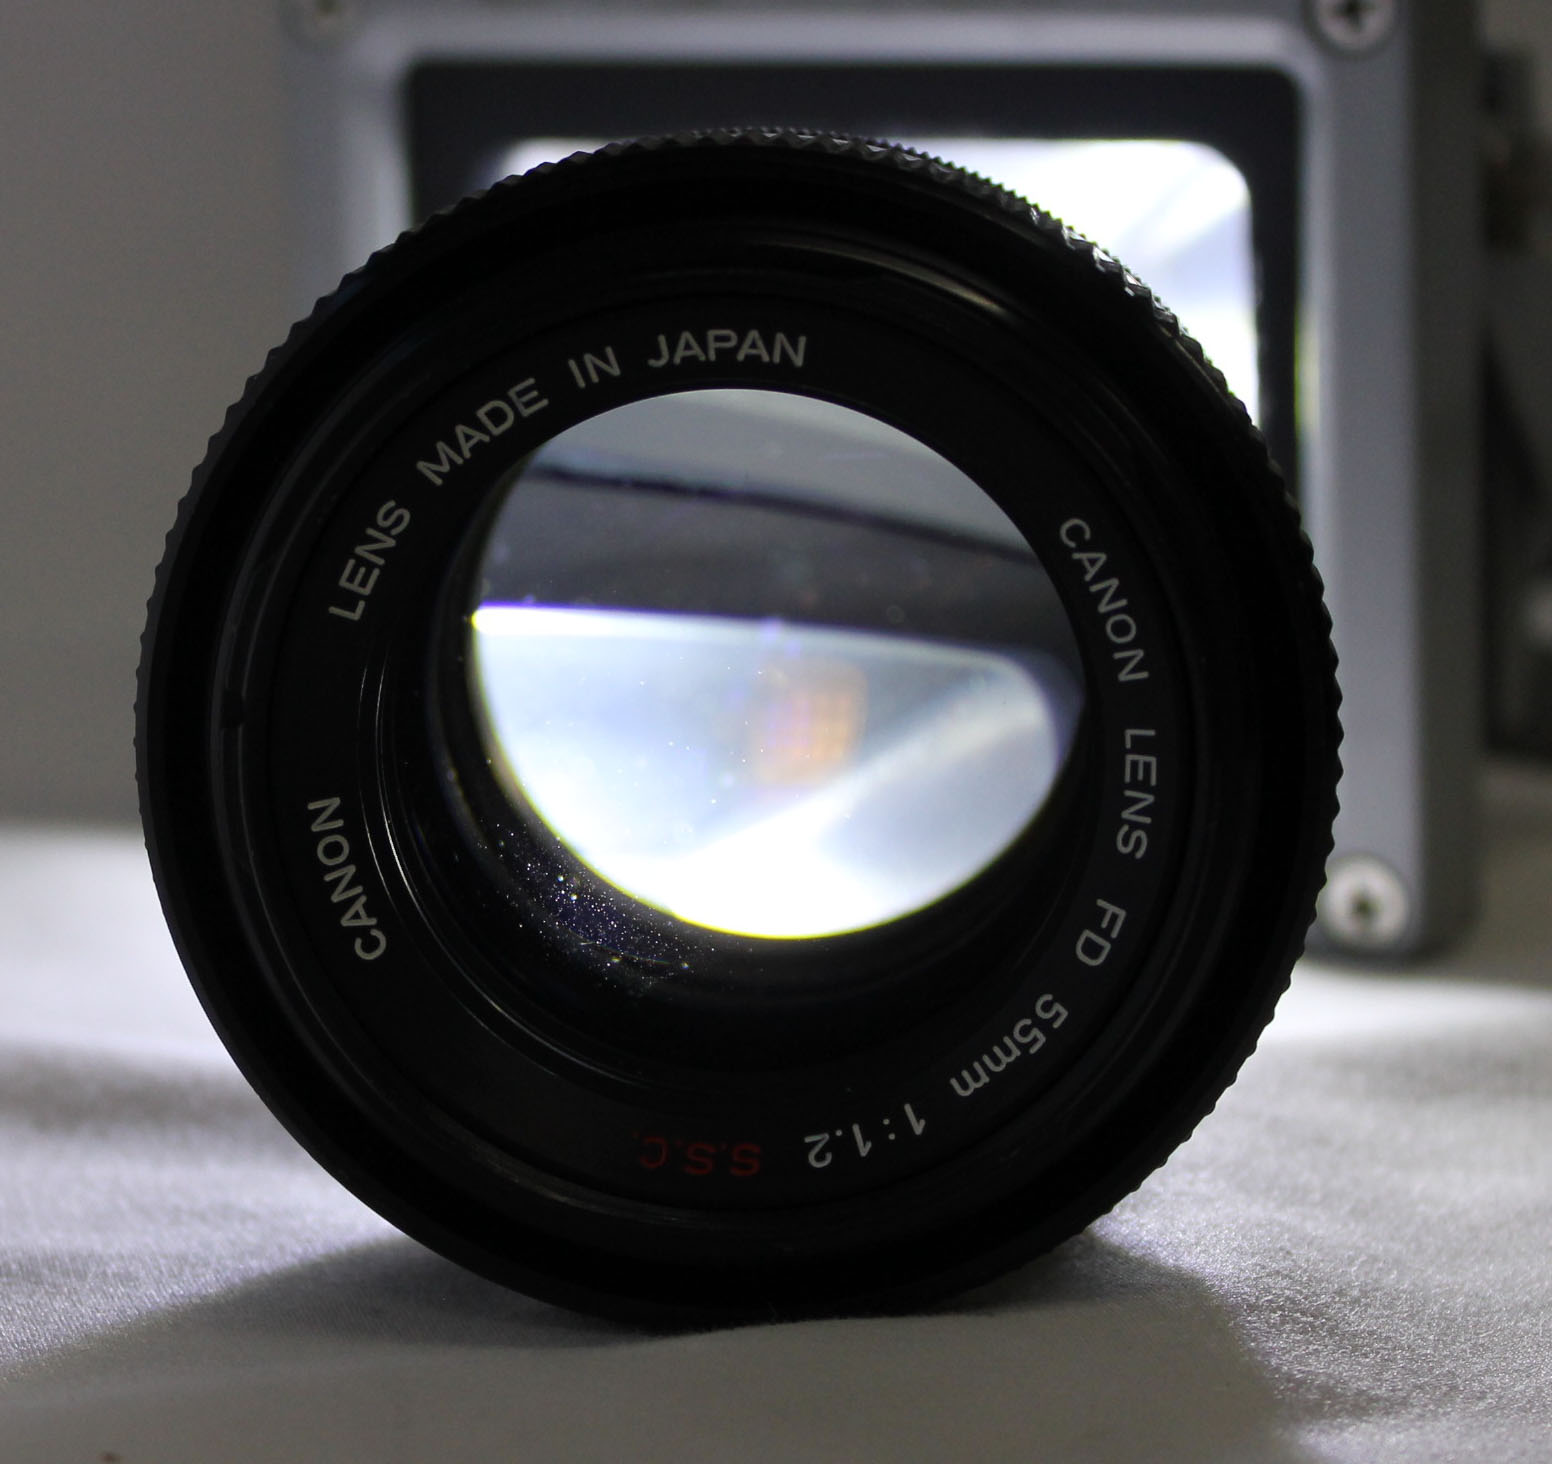  Canon FD 55mm F/1.2 S.S.C. ssc MF Standard Prime Lens from Japan Photo 8